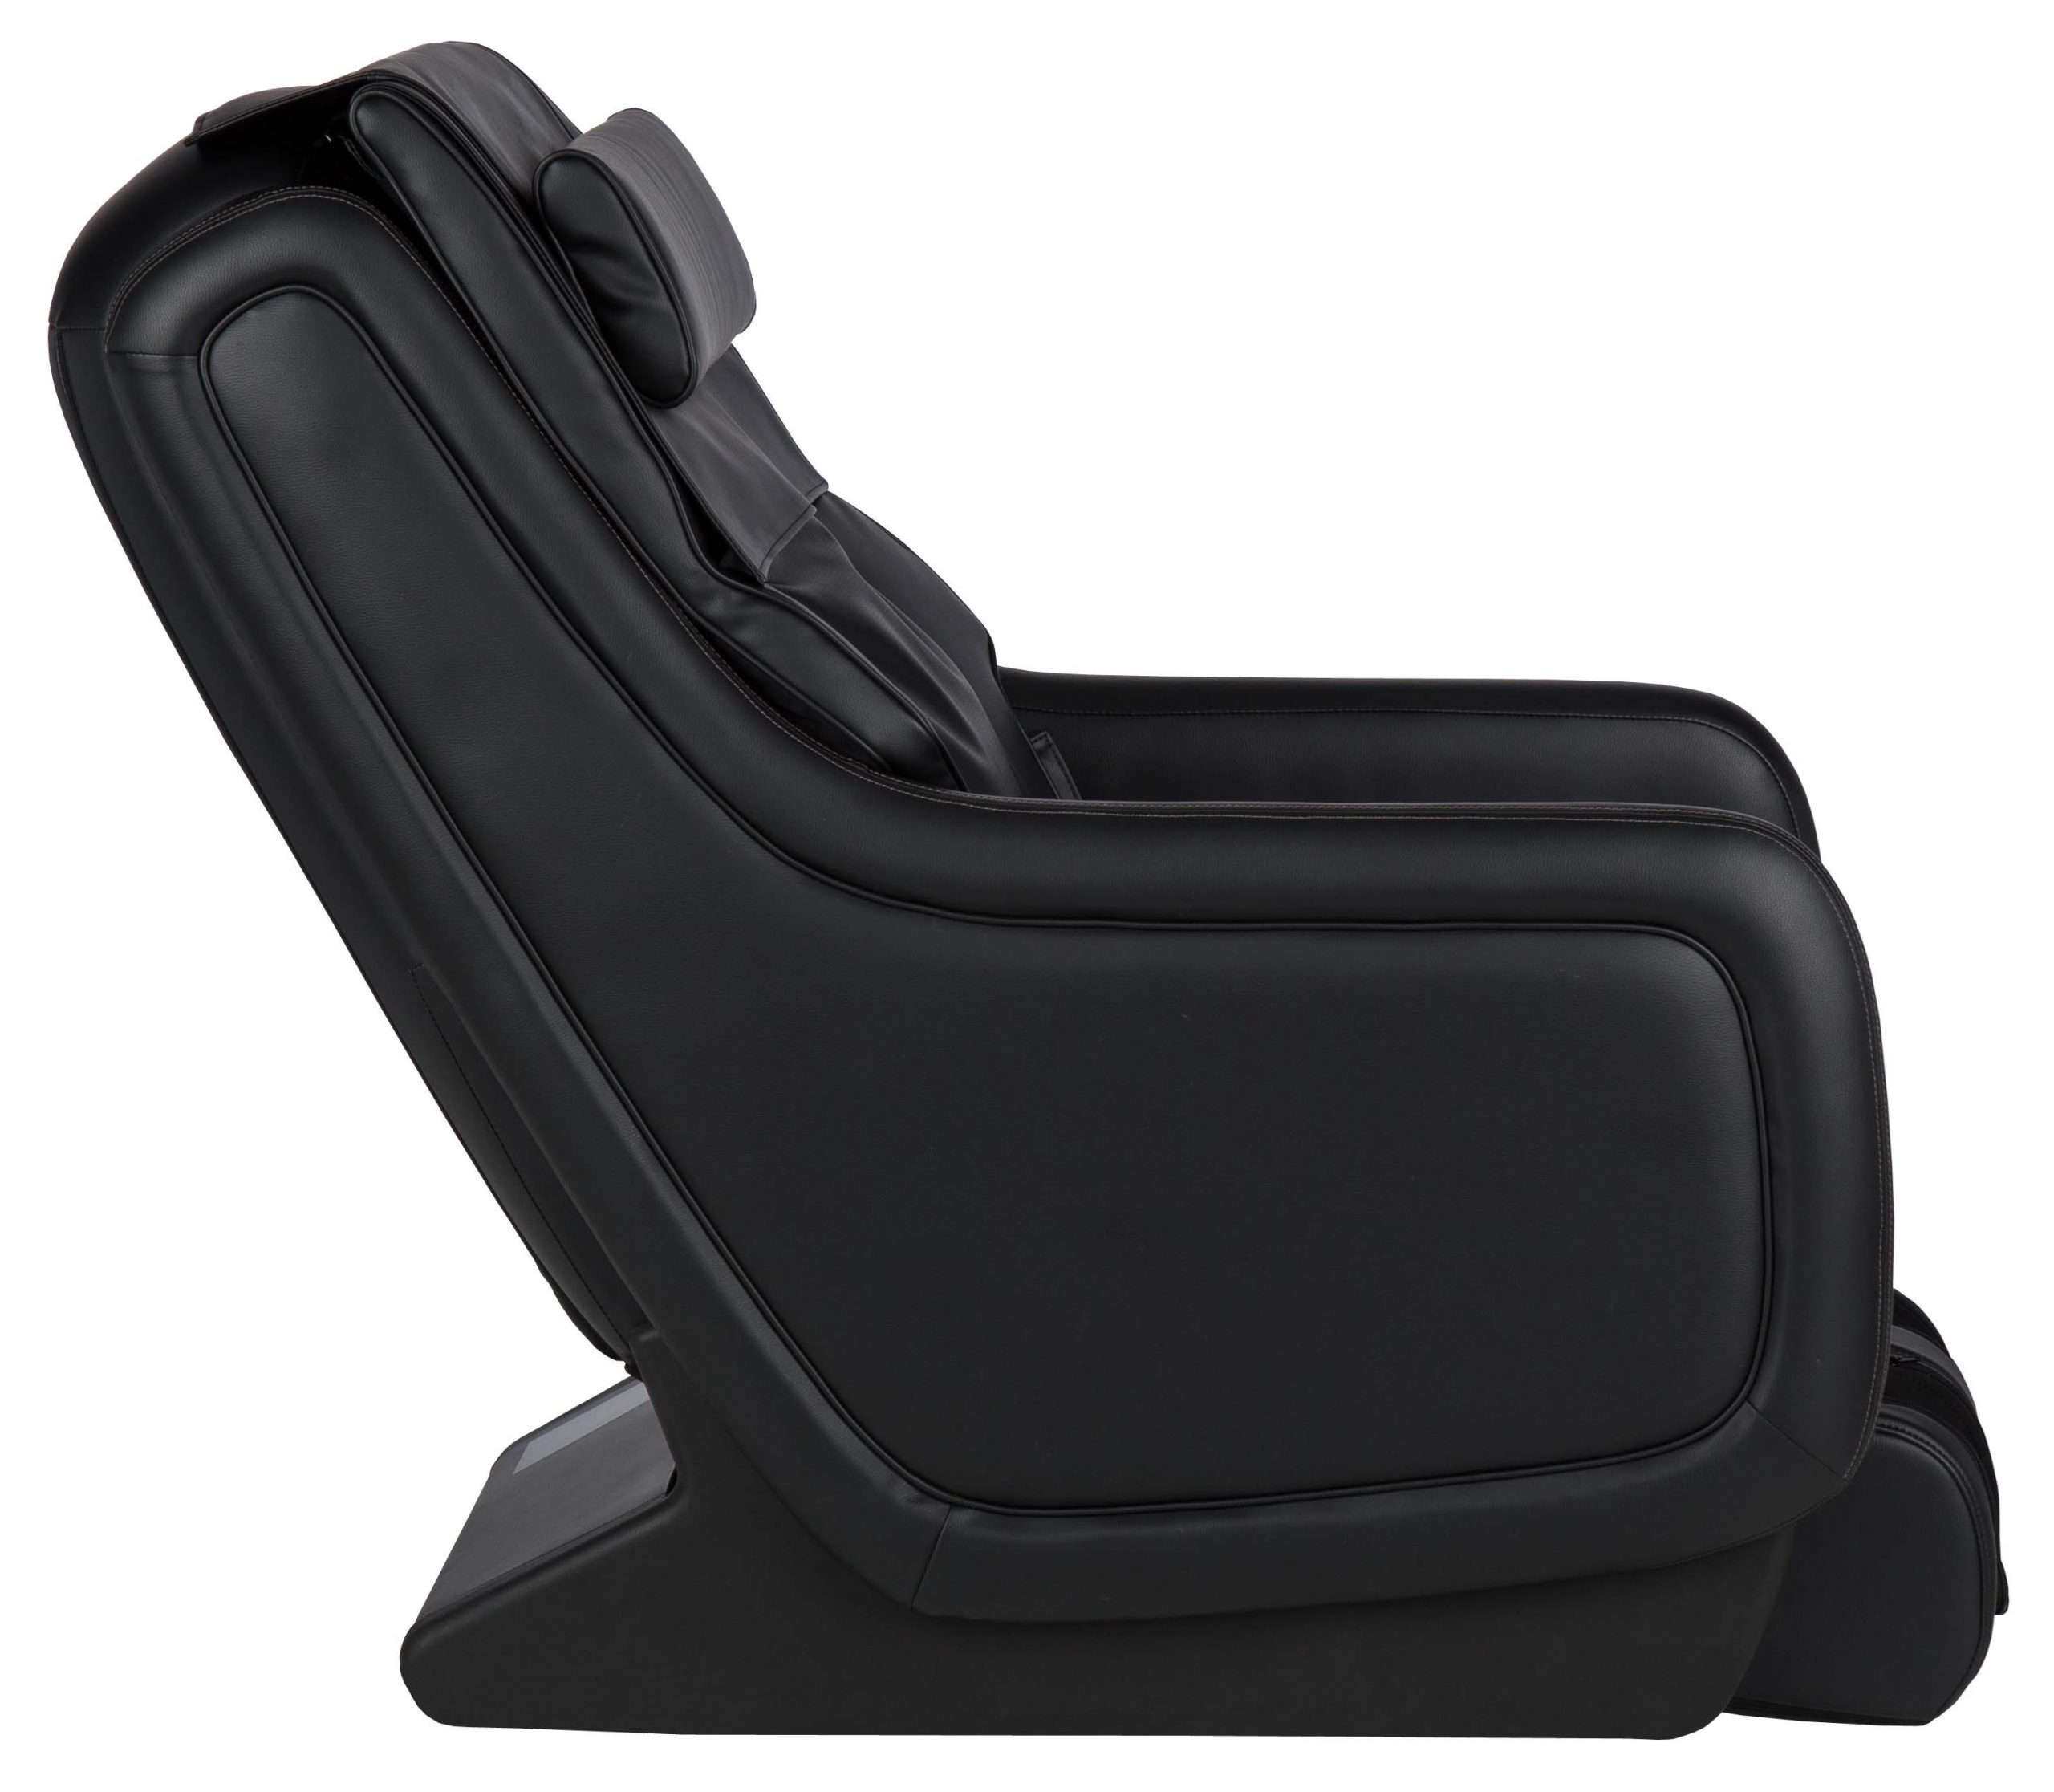 Human Touch Immersion Seating ZeroG 5.0 Massage Chair ...